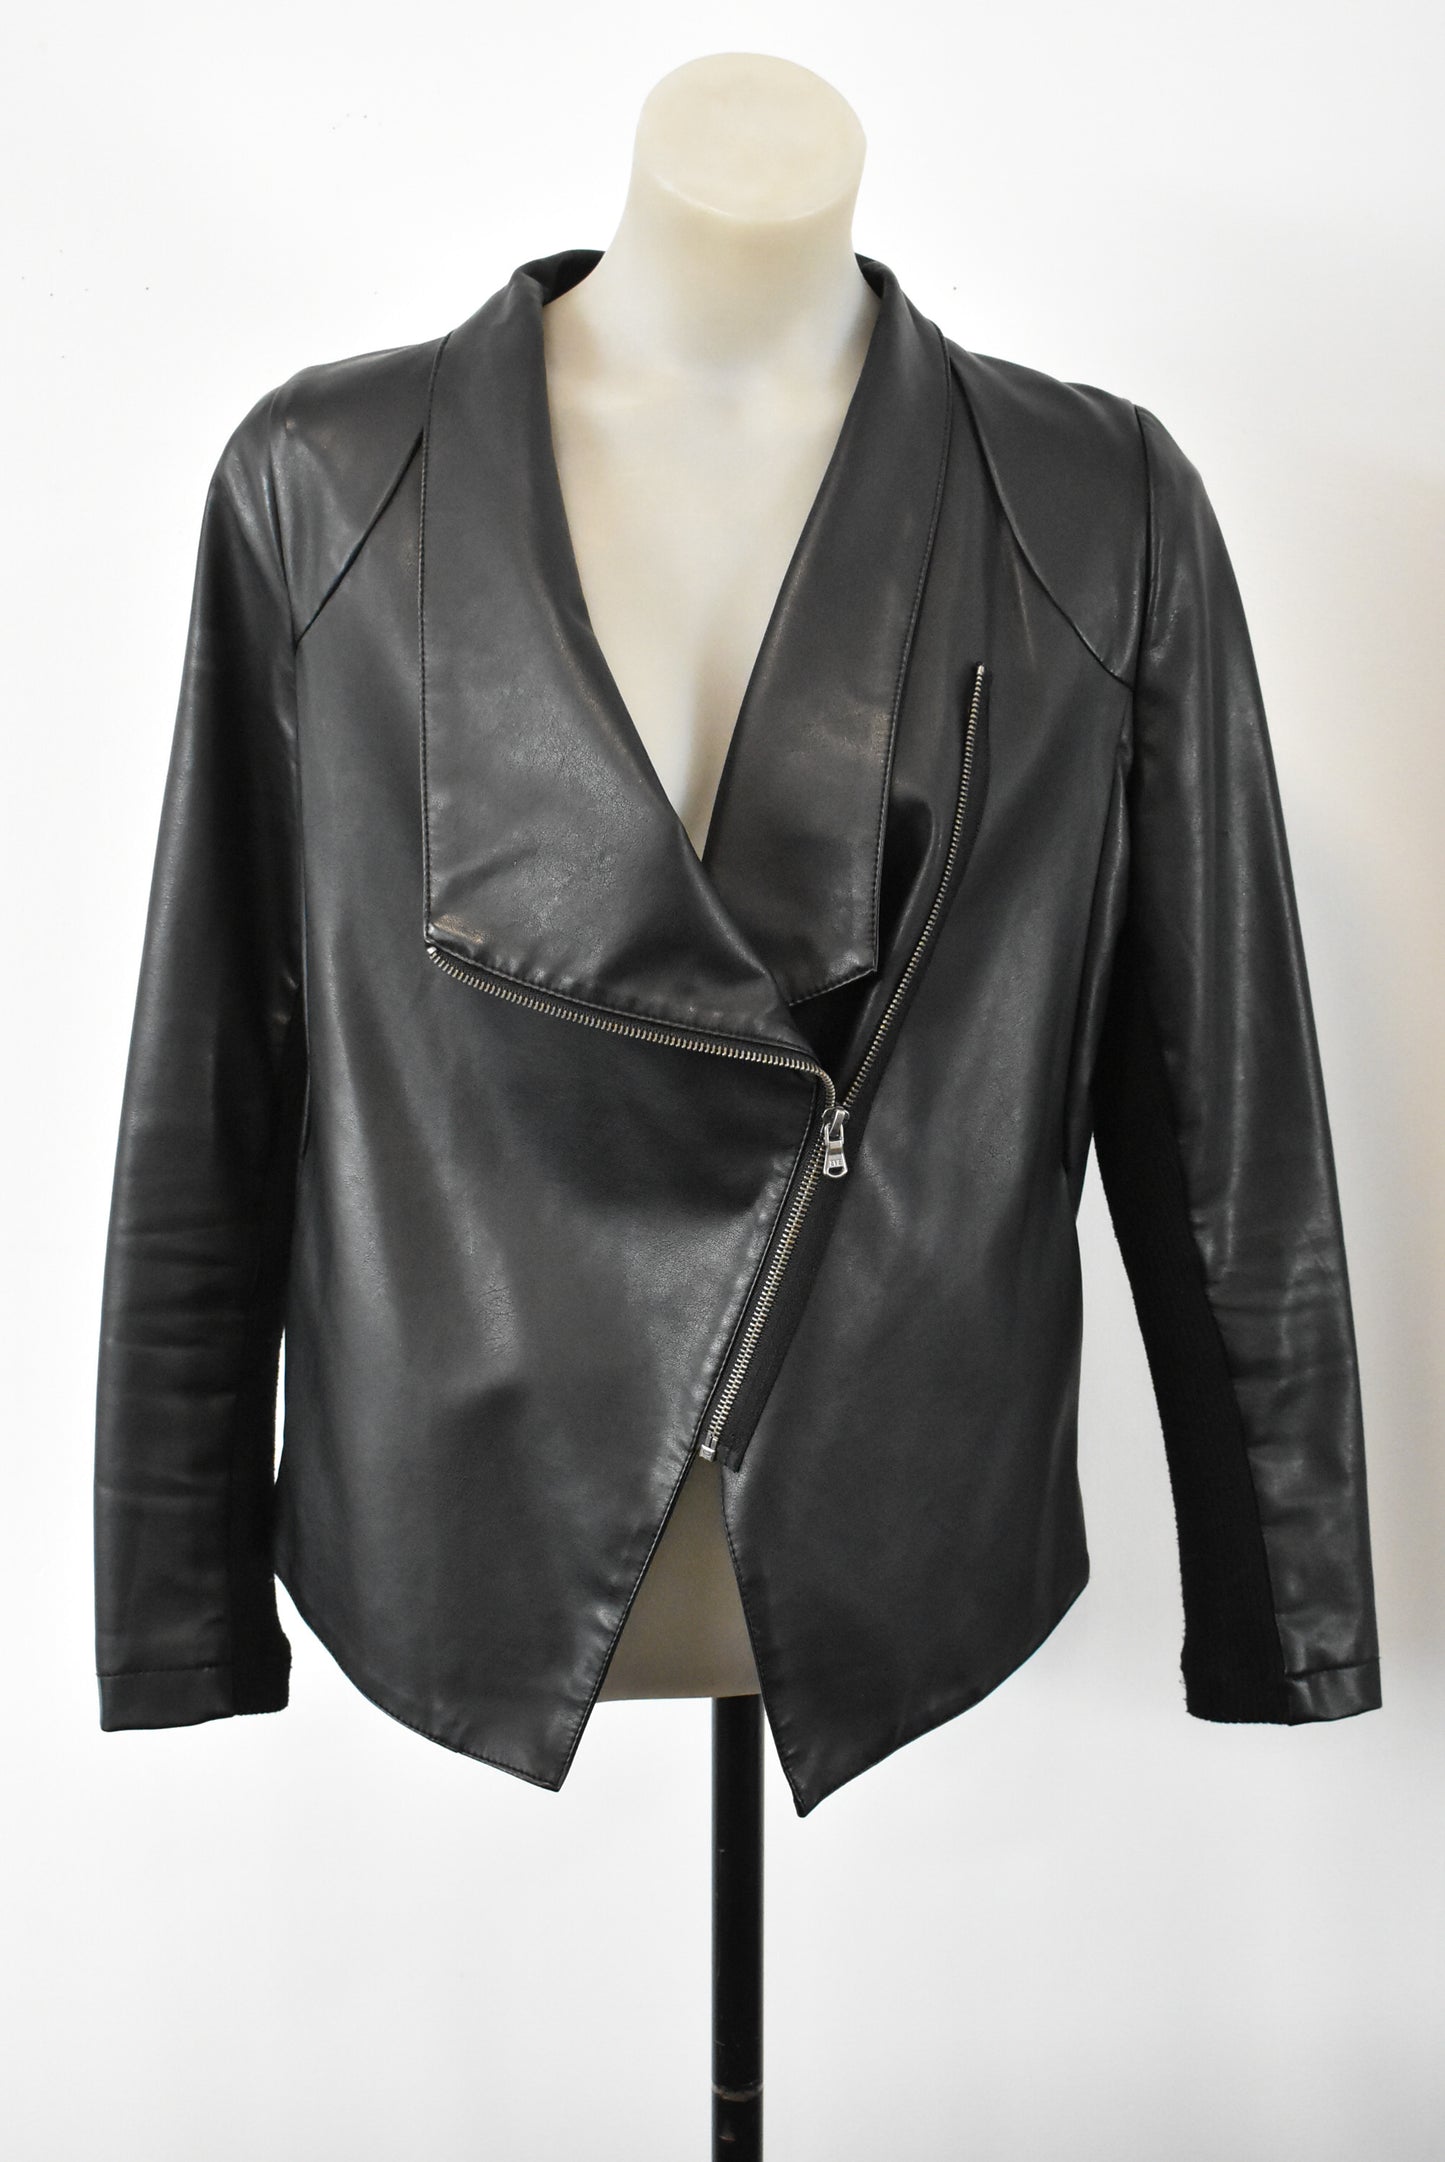 All About Eve pu leather jacket, 10